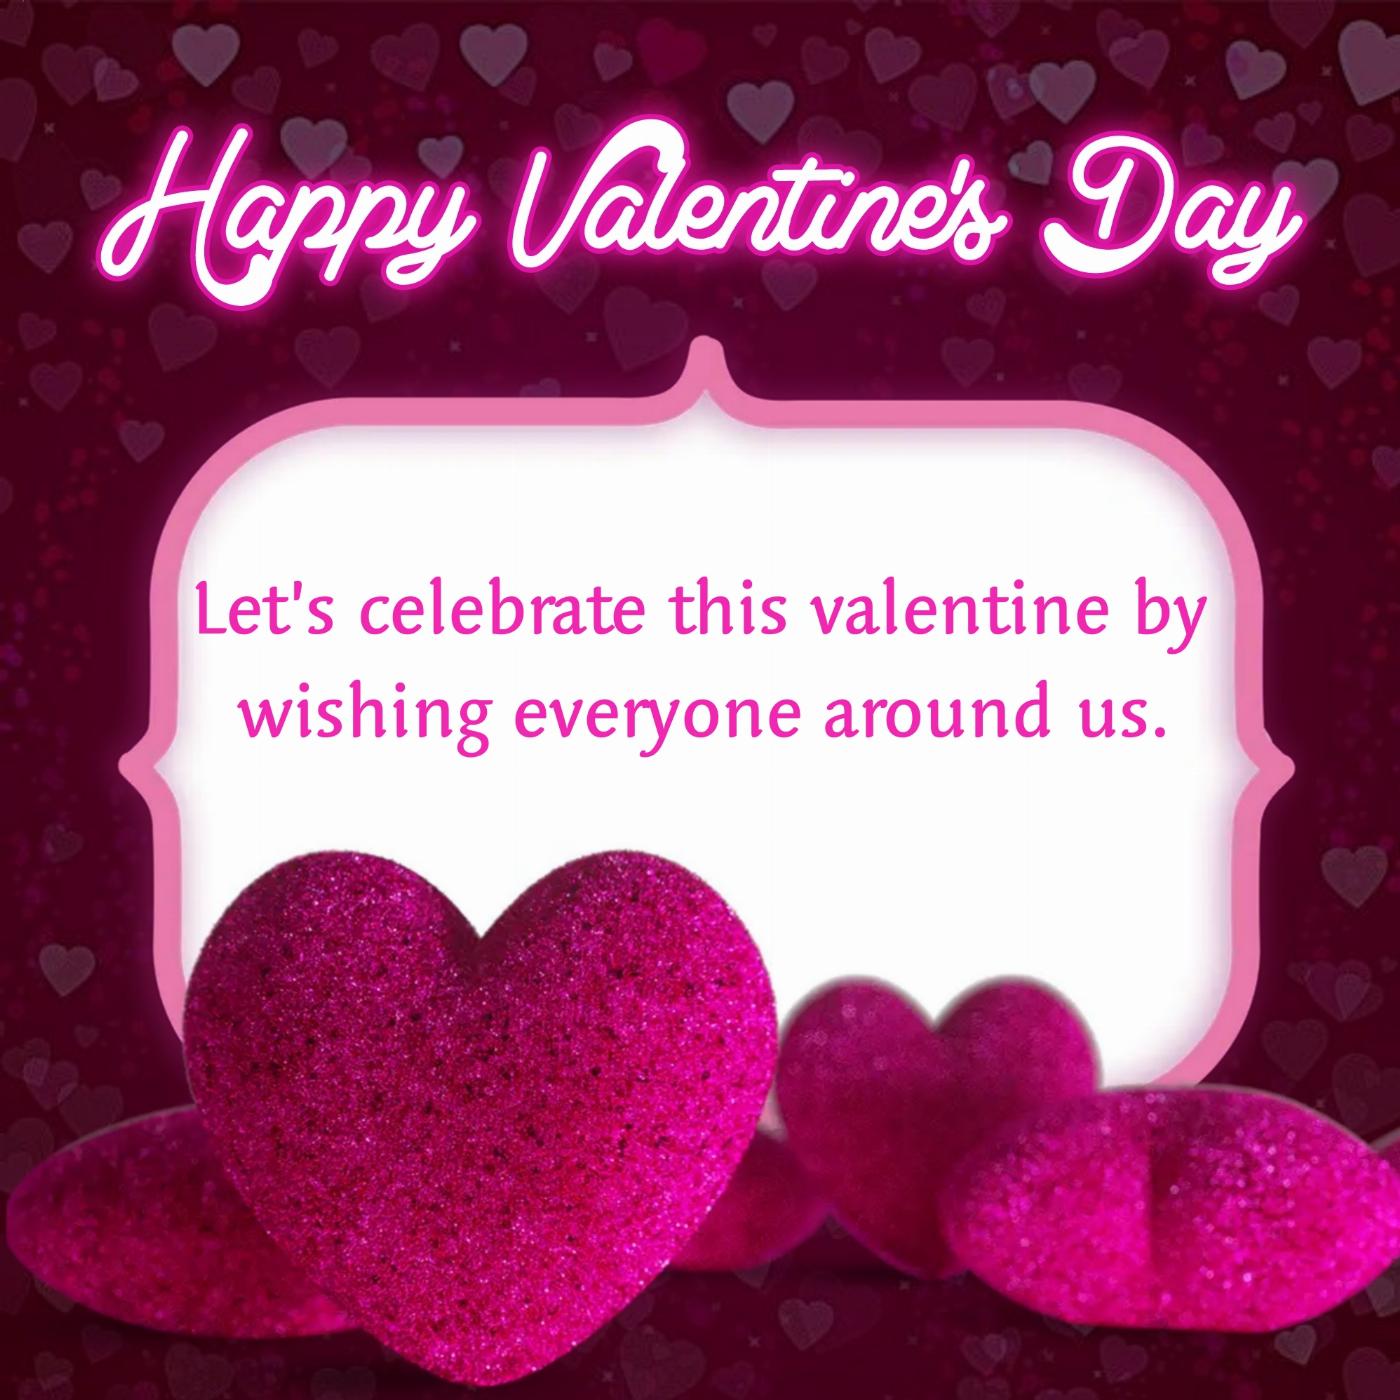 Lets celebrate this valentine by wishing everyone around us